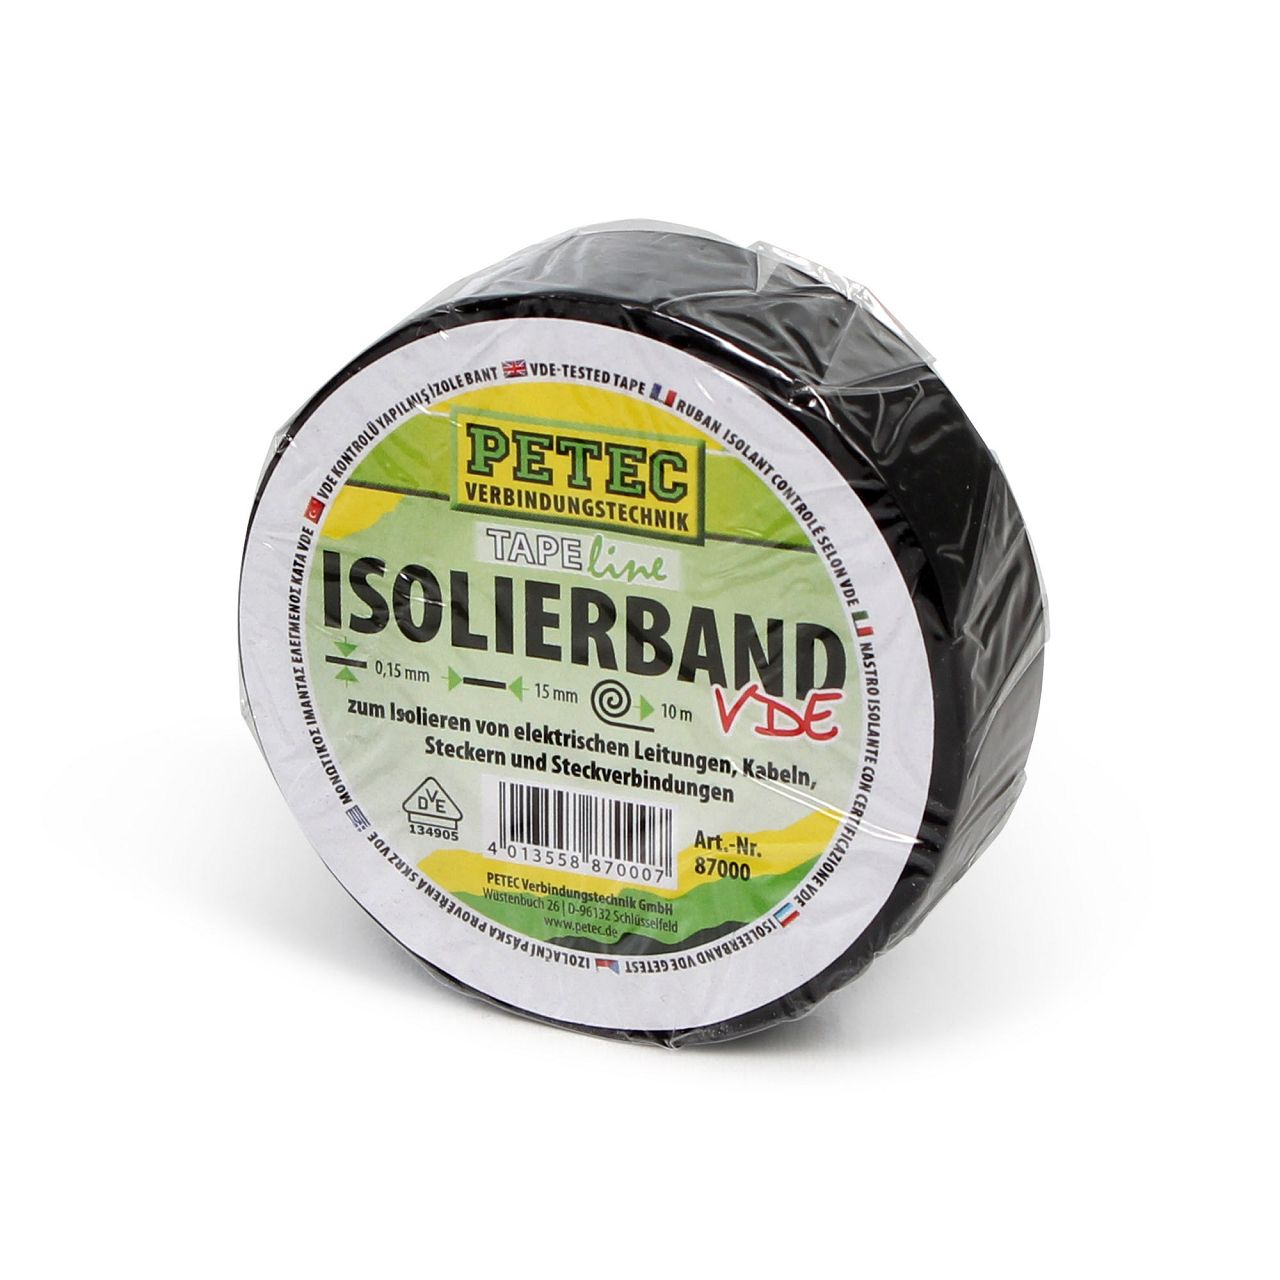 PETEC 87000 Isolierband VDE Klebeband Isolier-Tape ISO-Band 15mmx10m SCHWARZ